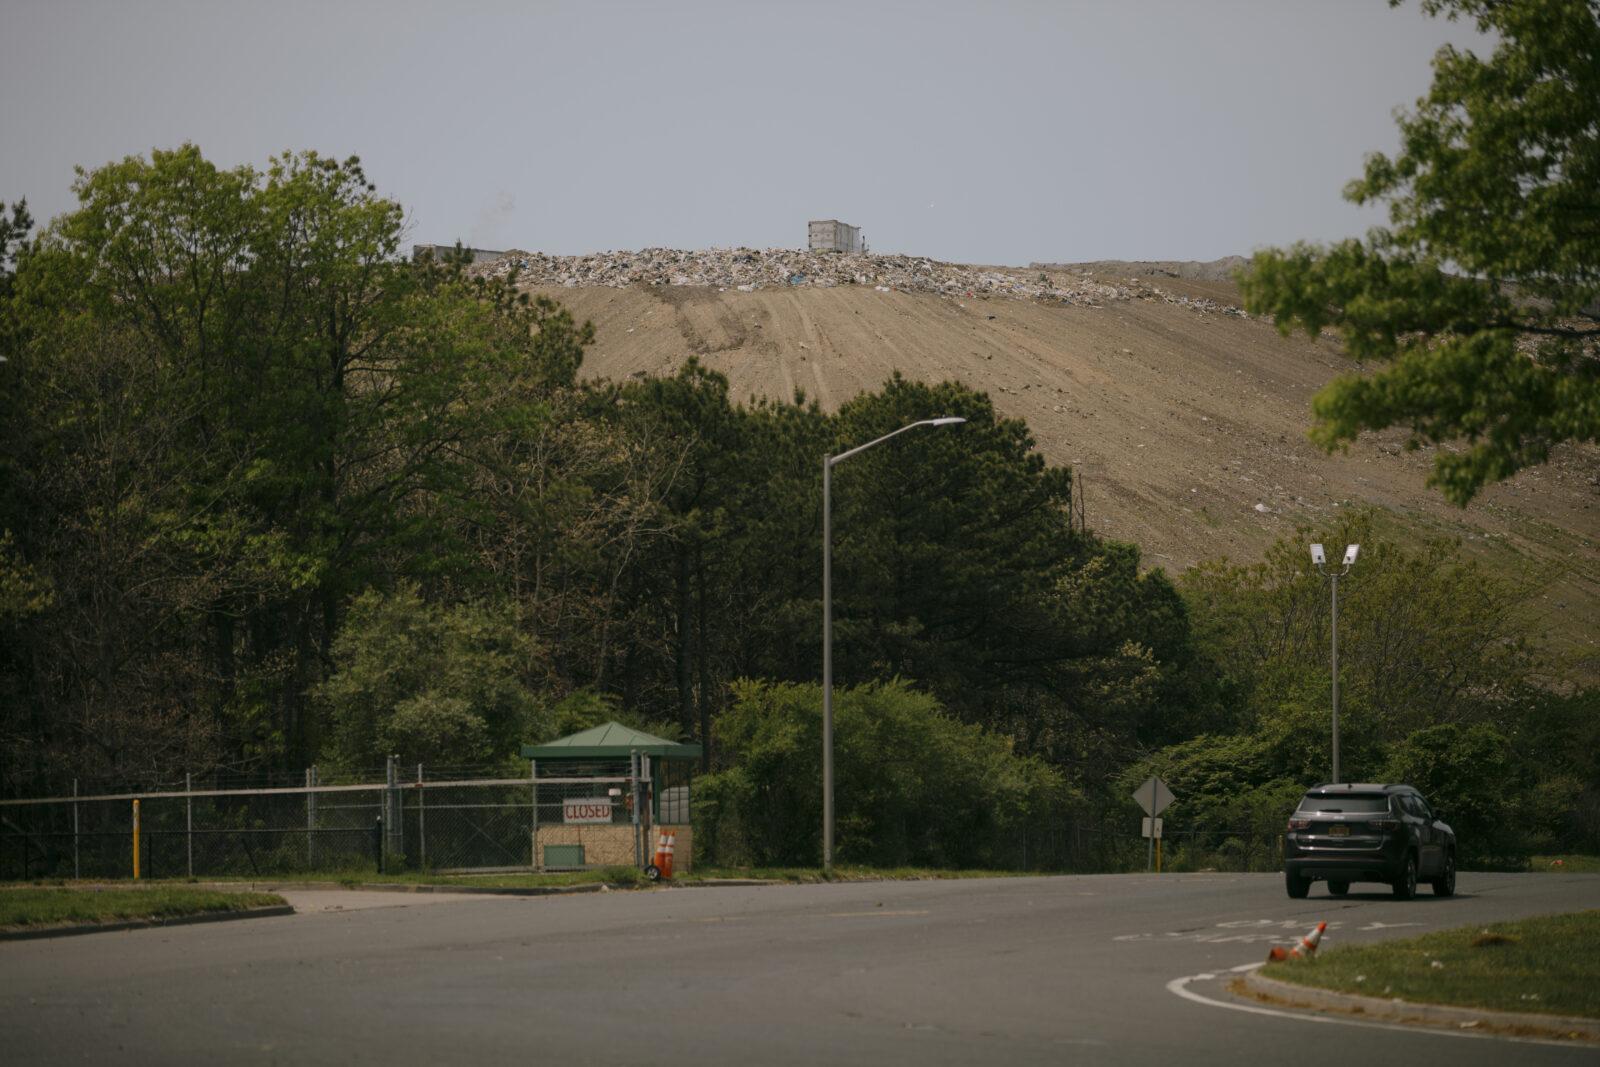 for Stat News: ‘A textbook case of environmental racism’: The battle over the Brookhaven Landfill